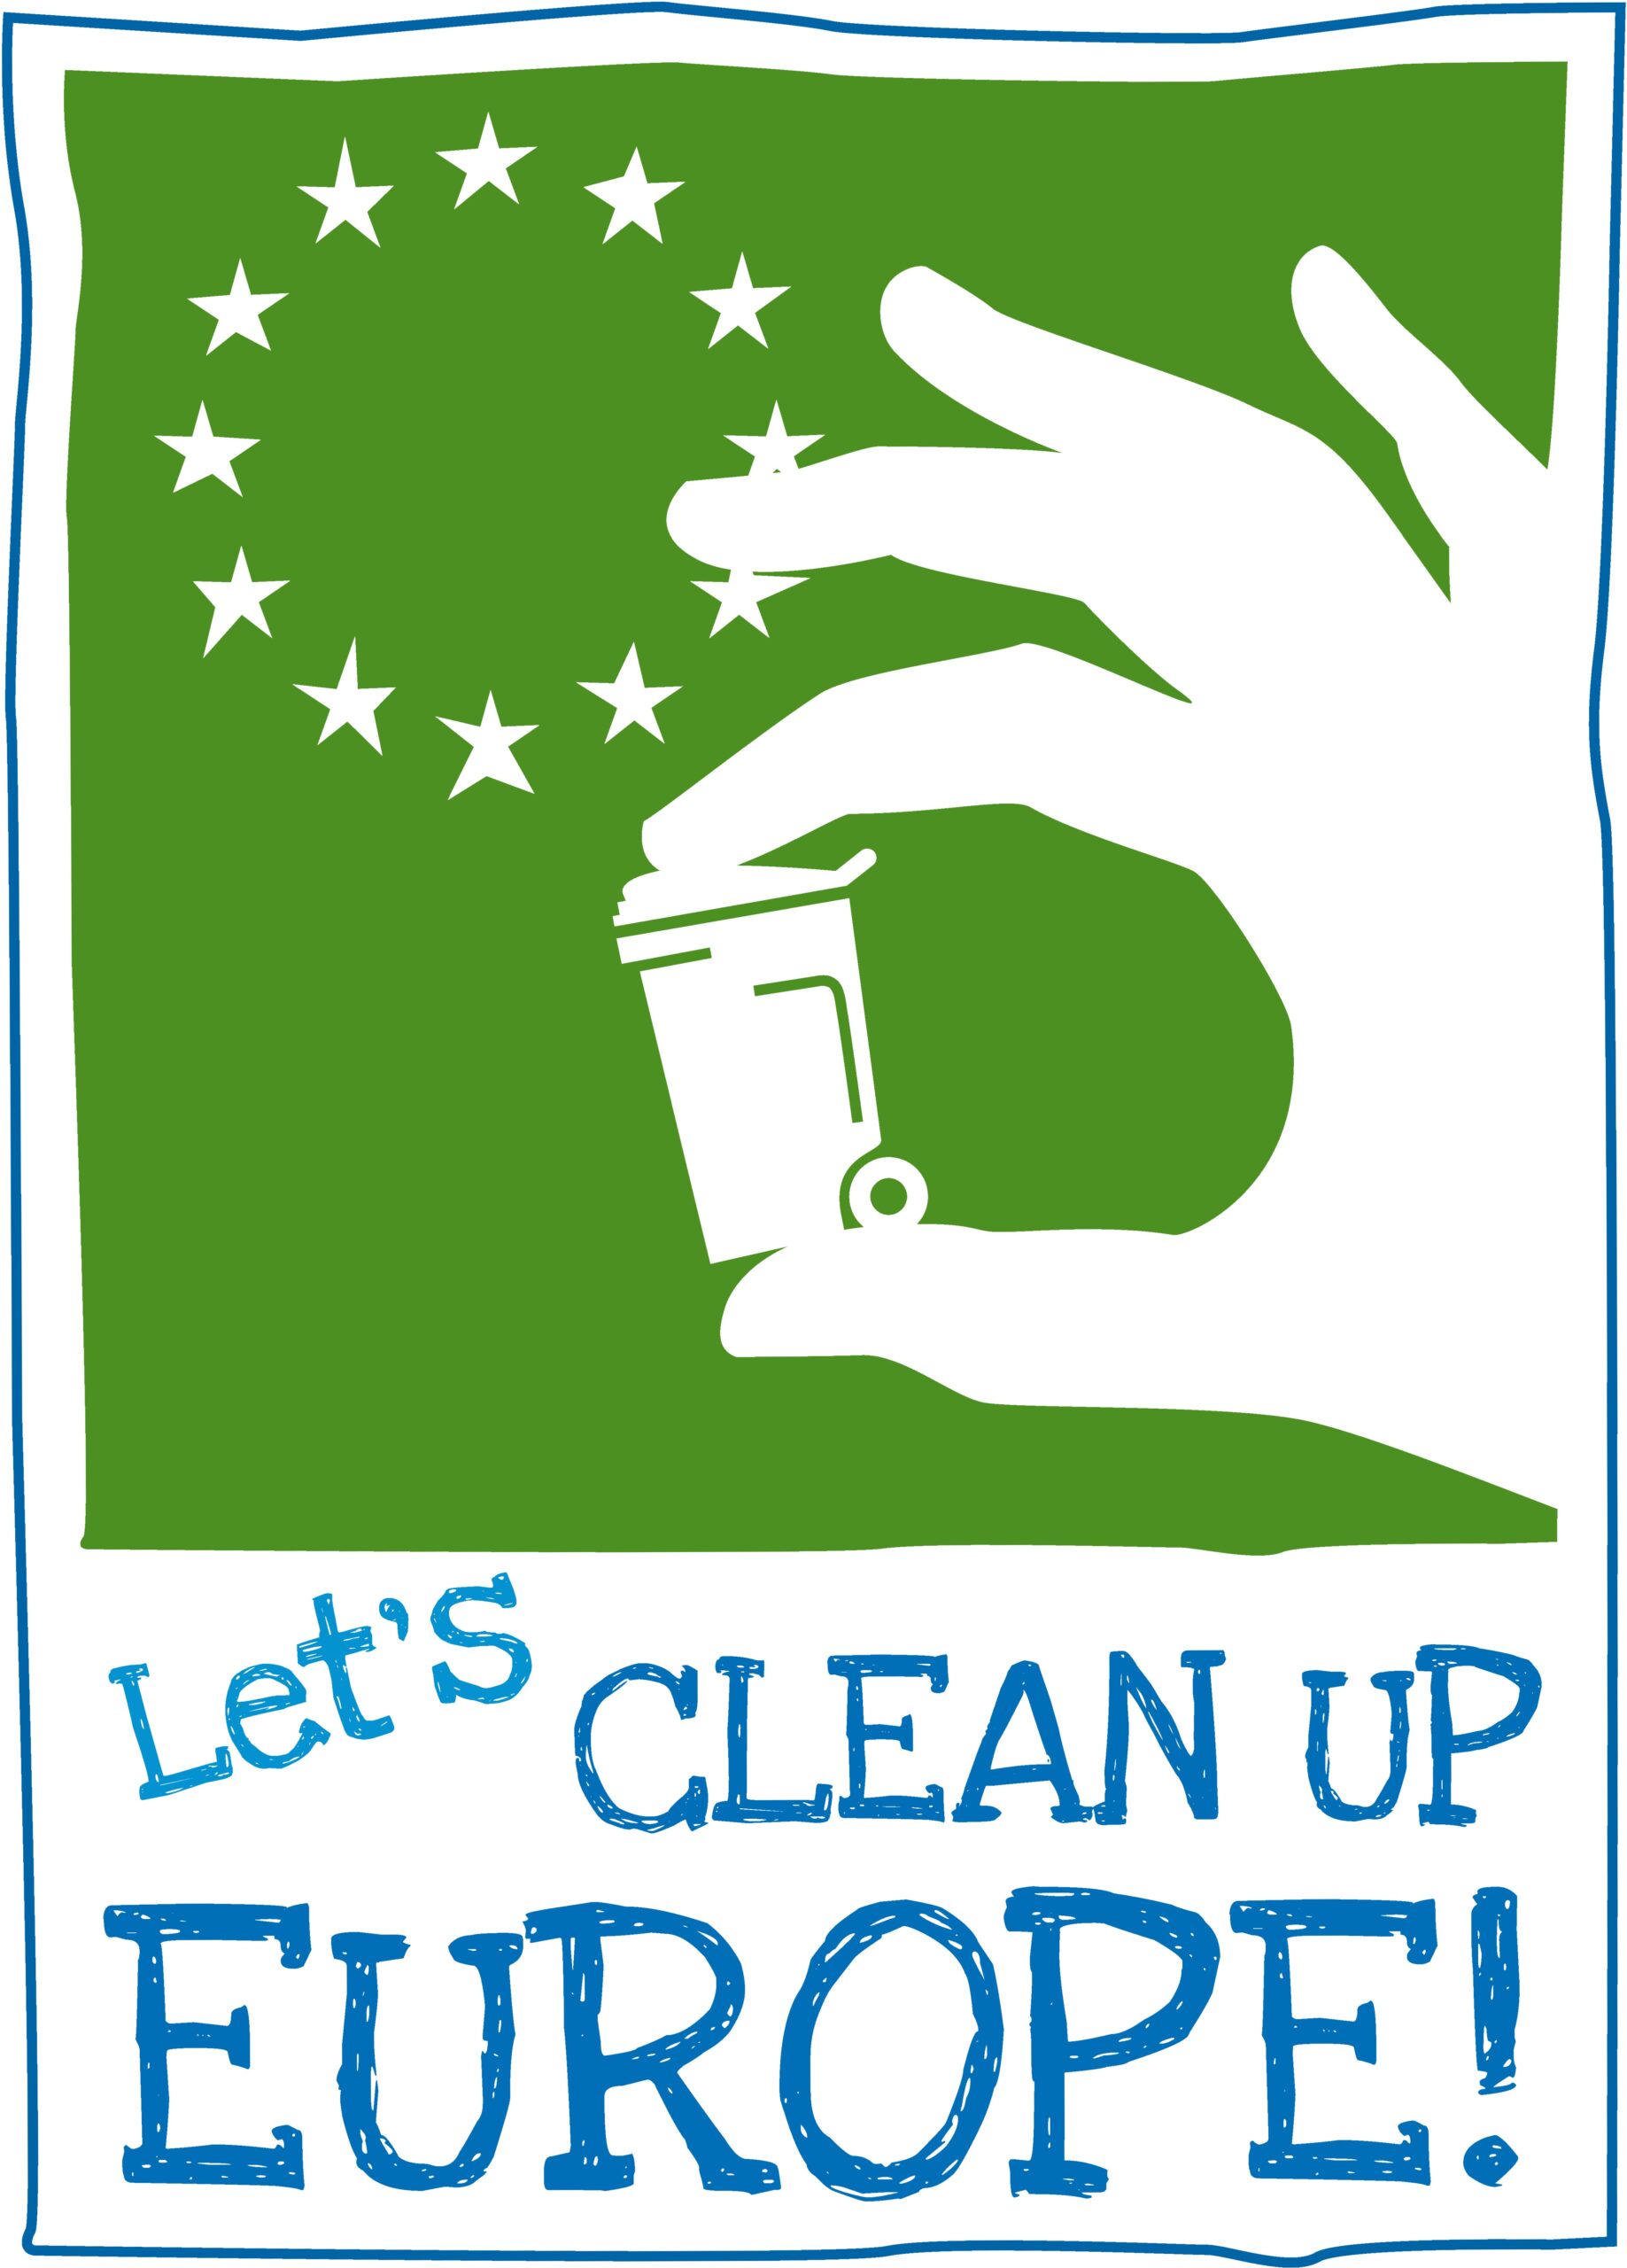 Lets clean up europe